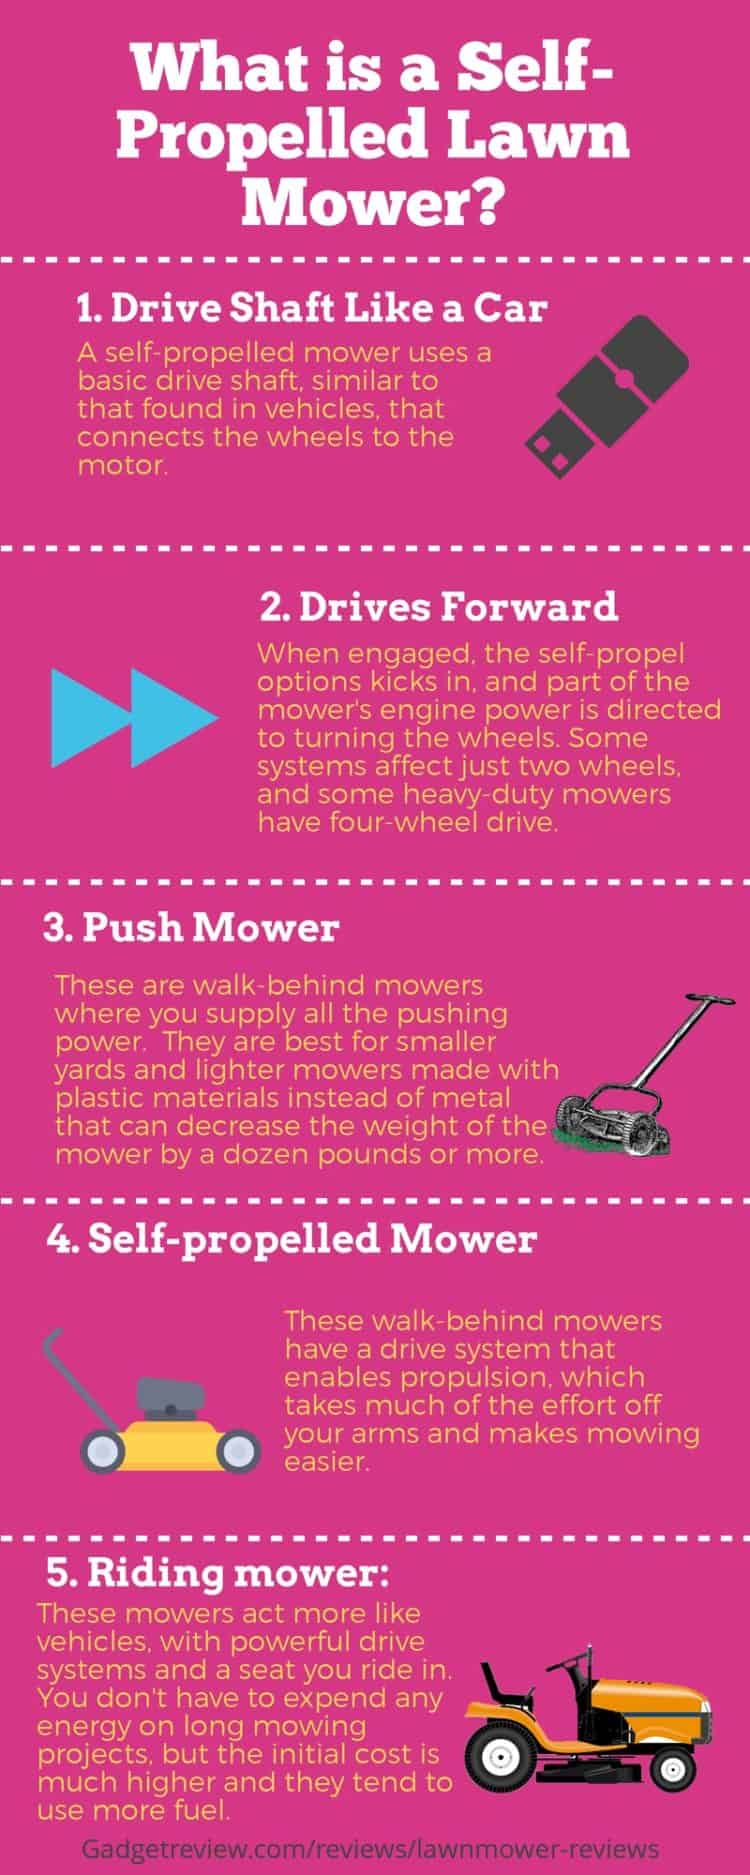 mower types infographic gadgetreview 750x1875 1